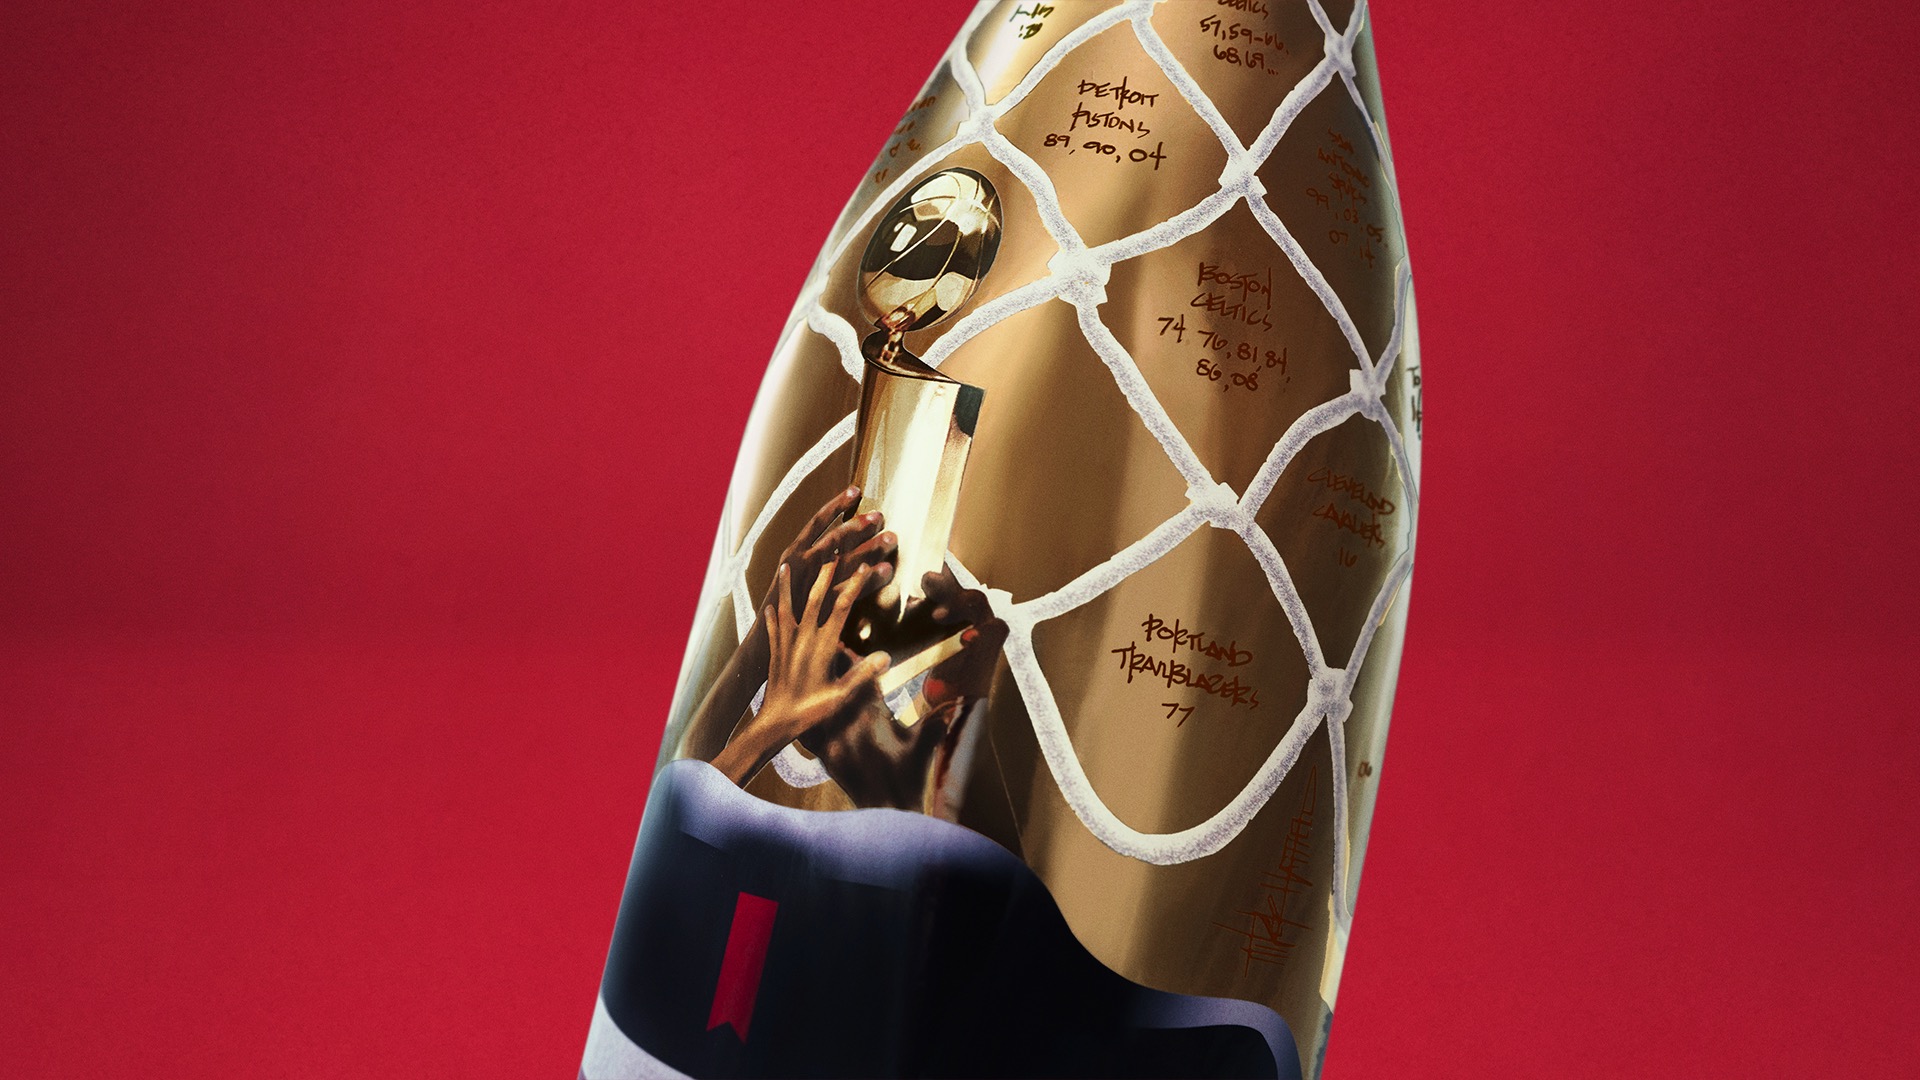 Michelob ULTRA & Tinker Hatfield To Drop Limited Edition Championship Bottle